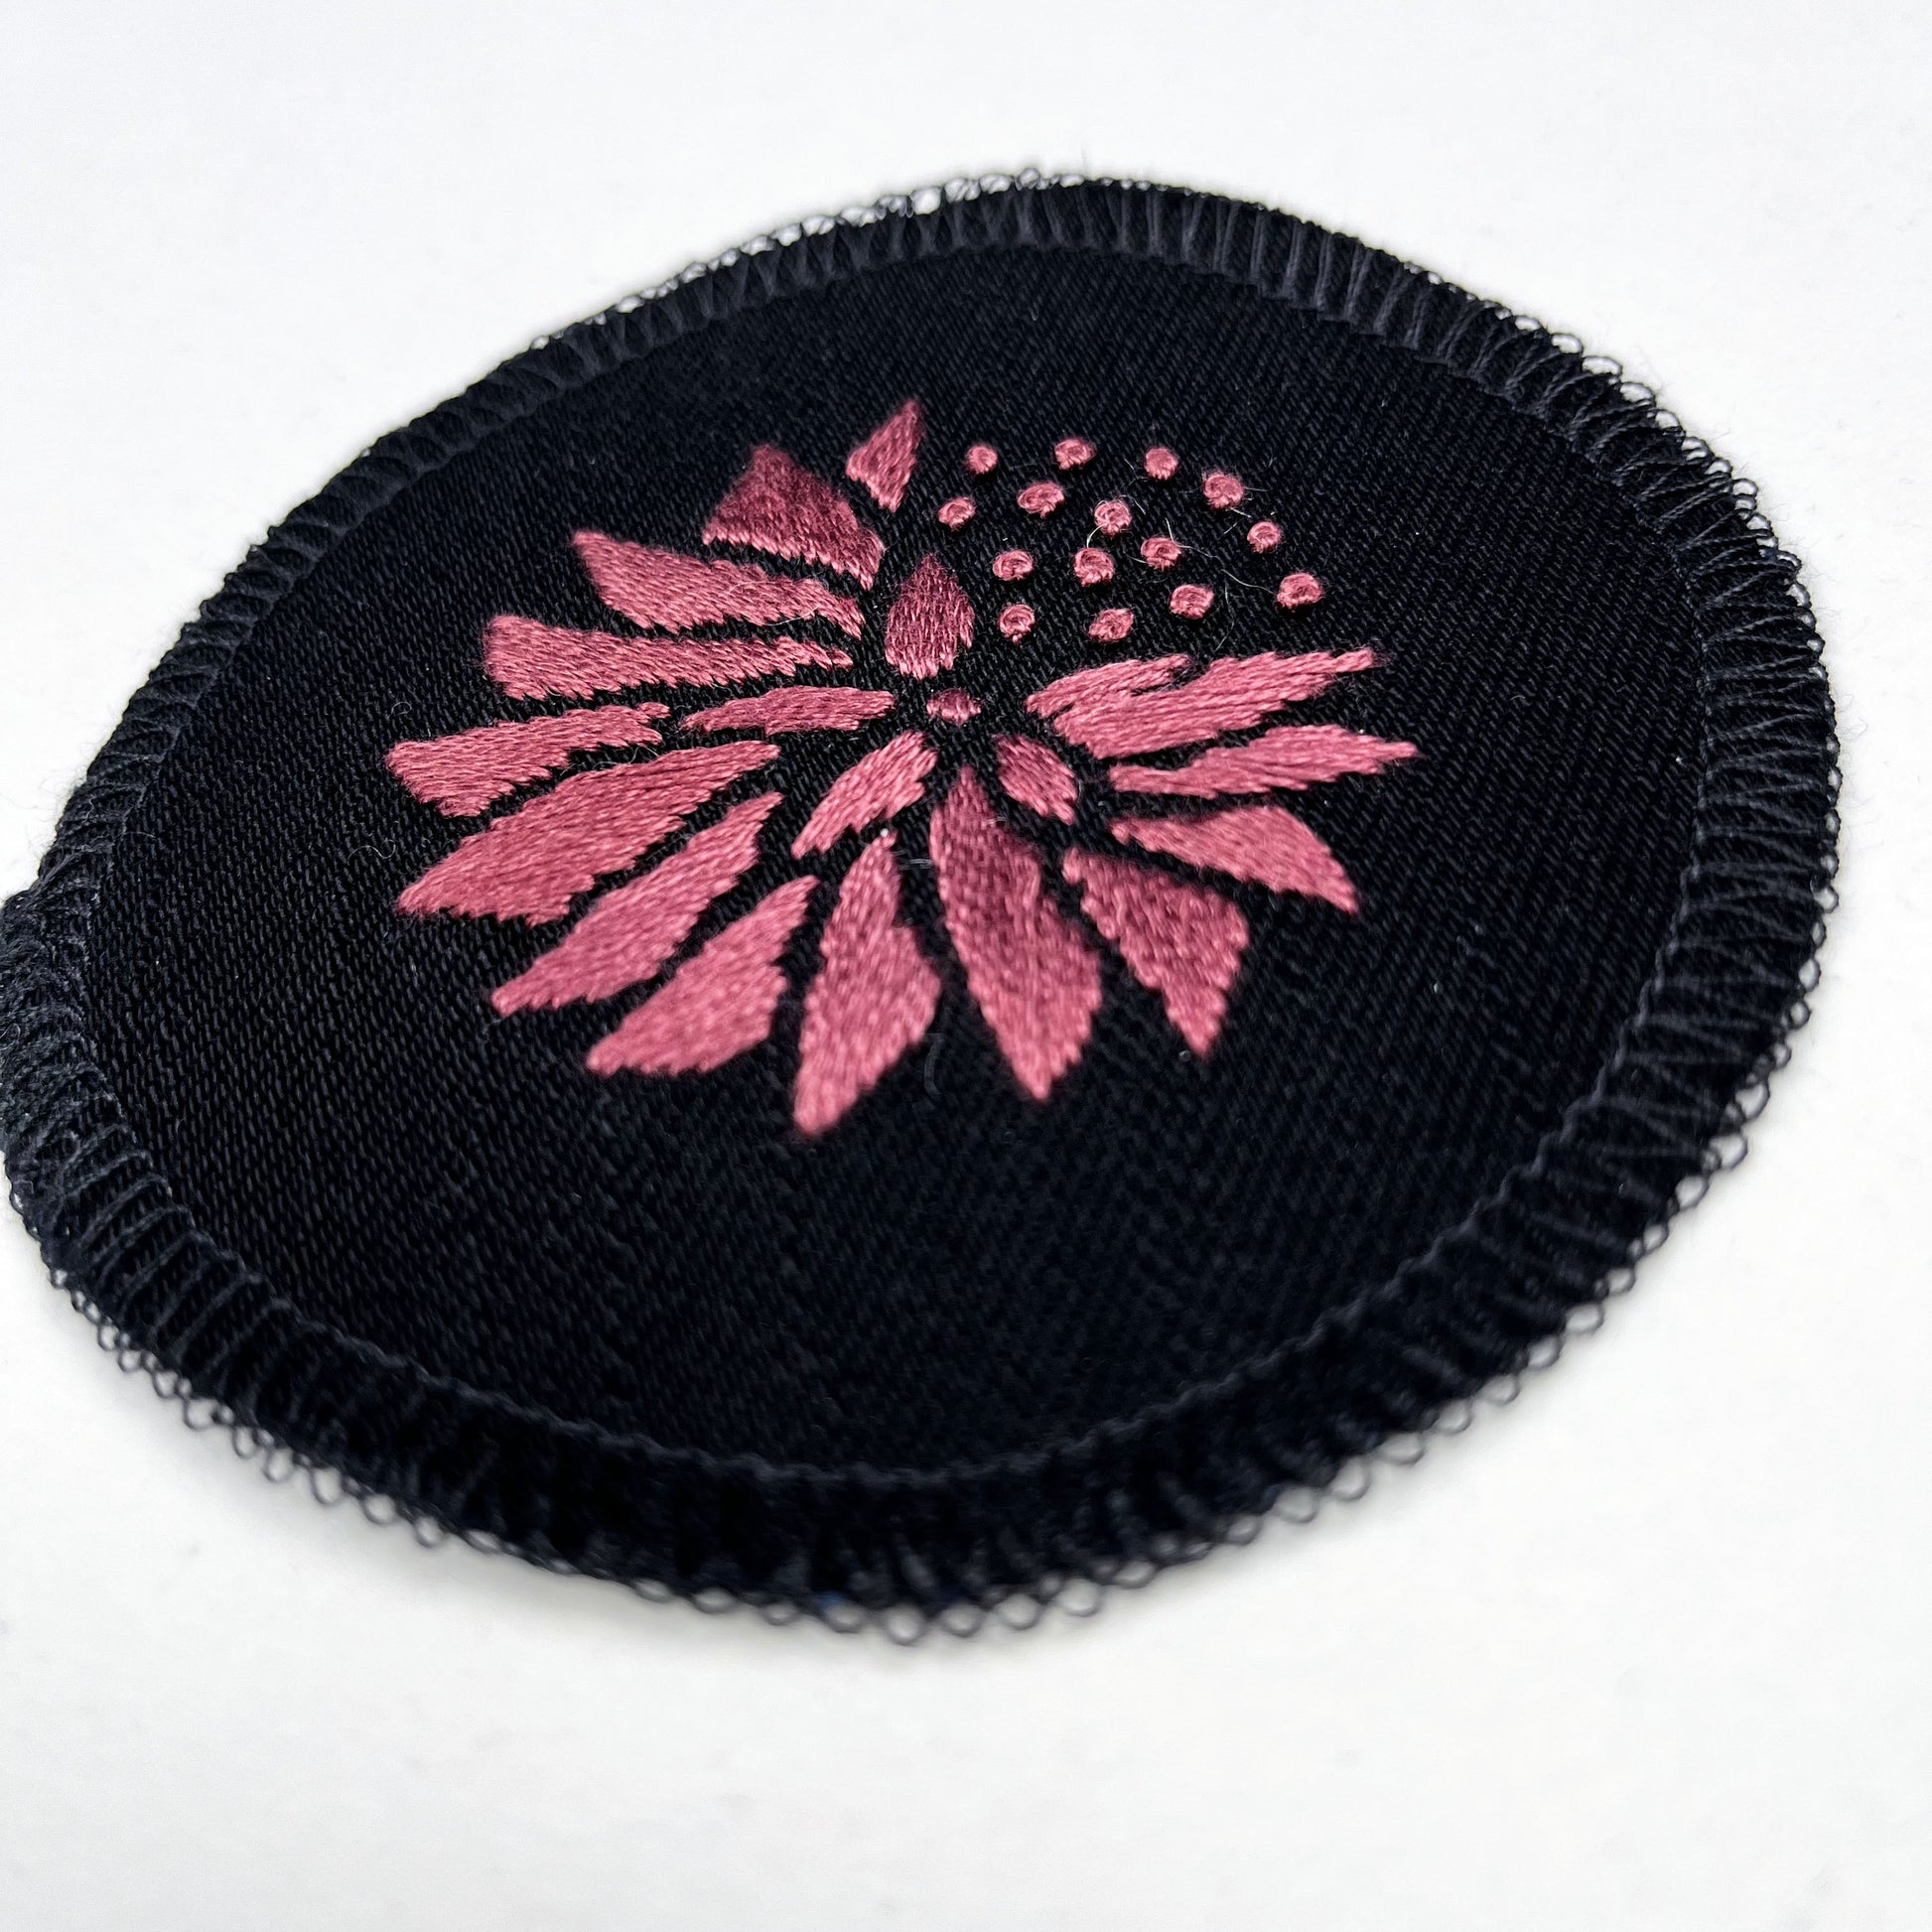 a circle shaped patch made out of black twill weave fabric, hand embroidered with an abstract dandelion in plum colored floss, with solid filled petals, edges overlocked in black, on a white background